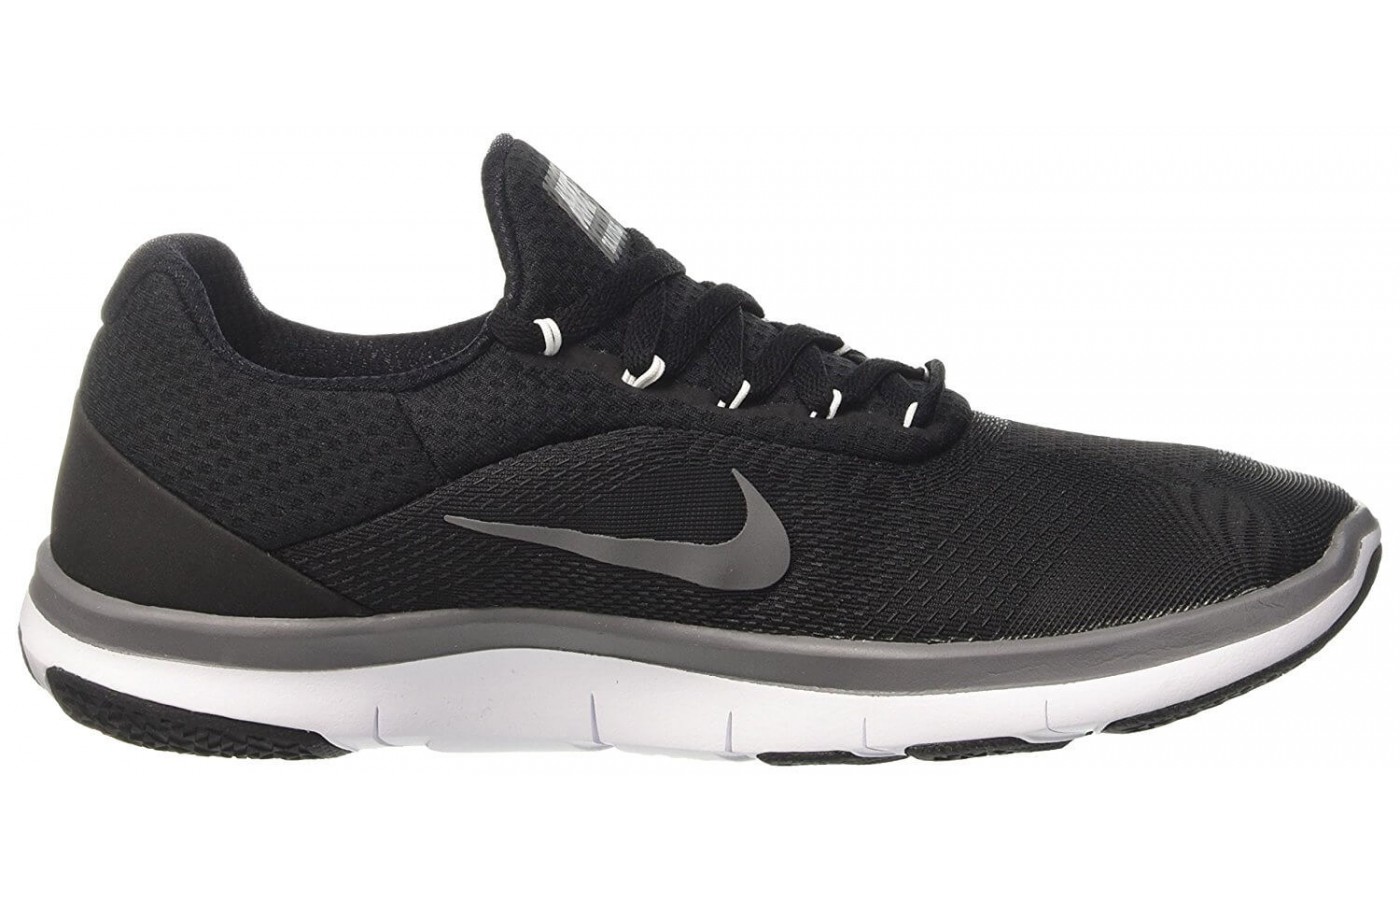 The Nike Free Trainer V7 features a minimalist design